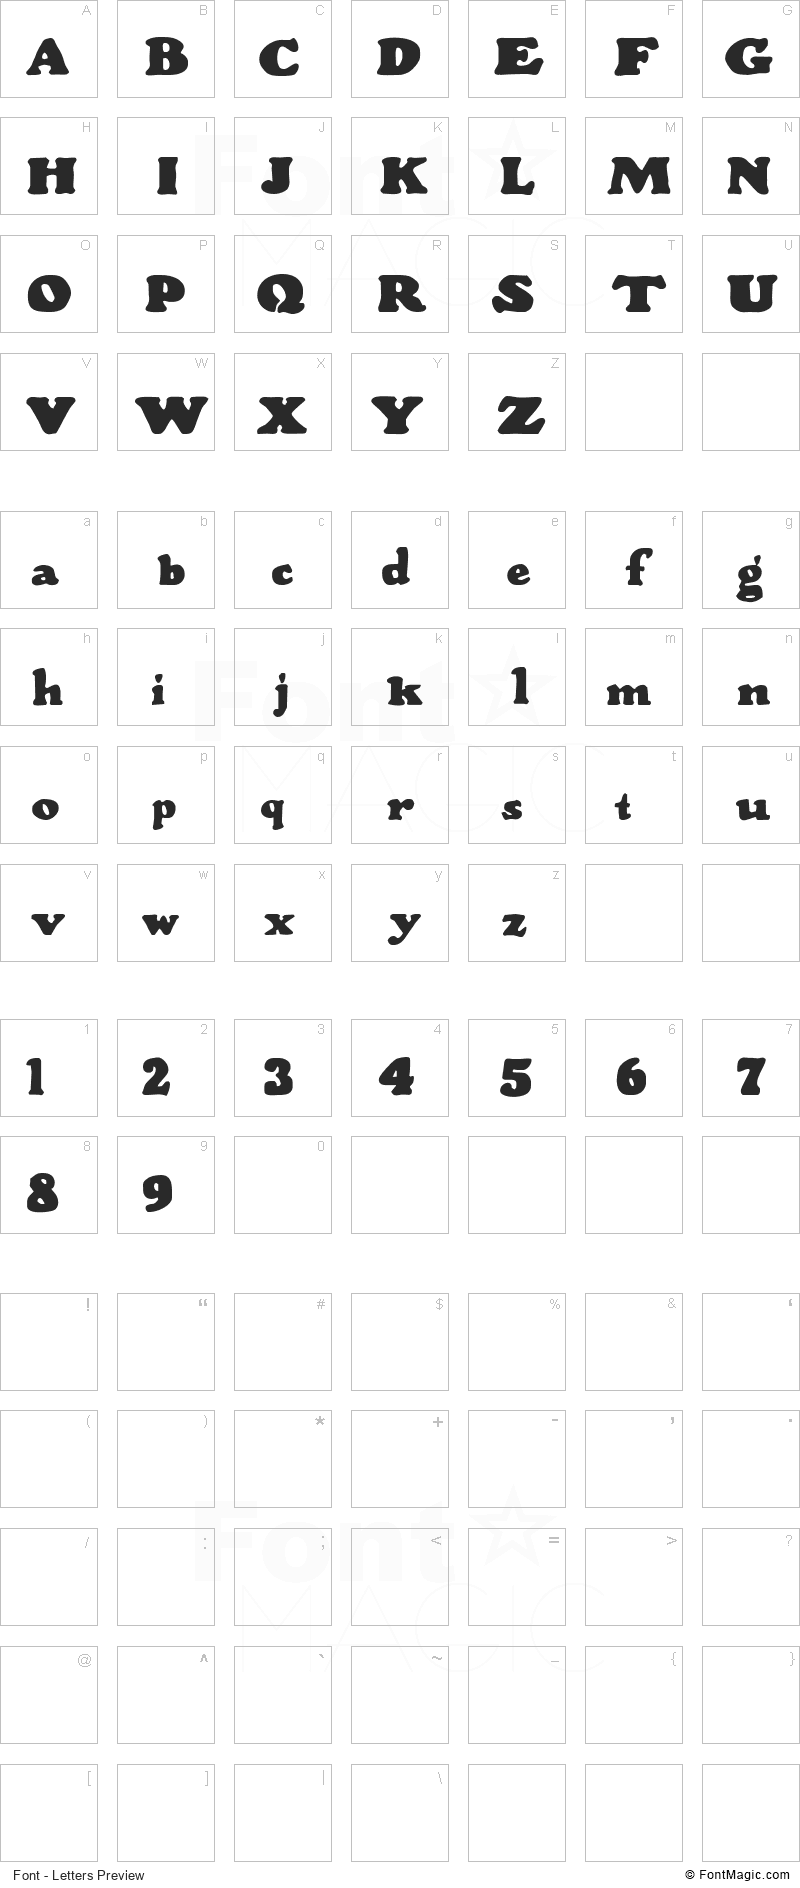 Wood Stevens Bold Font - All Latters Preview Chart